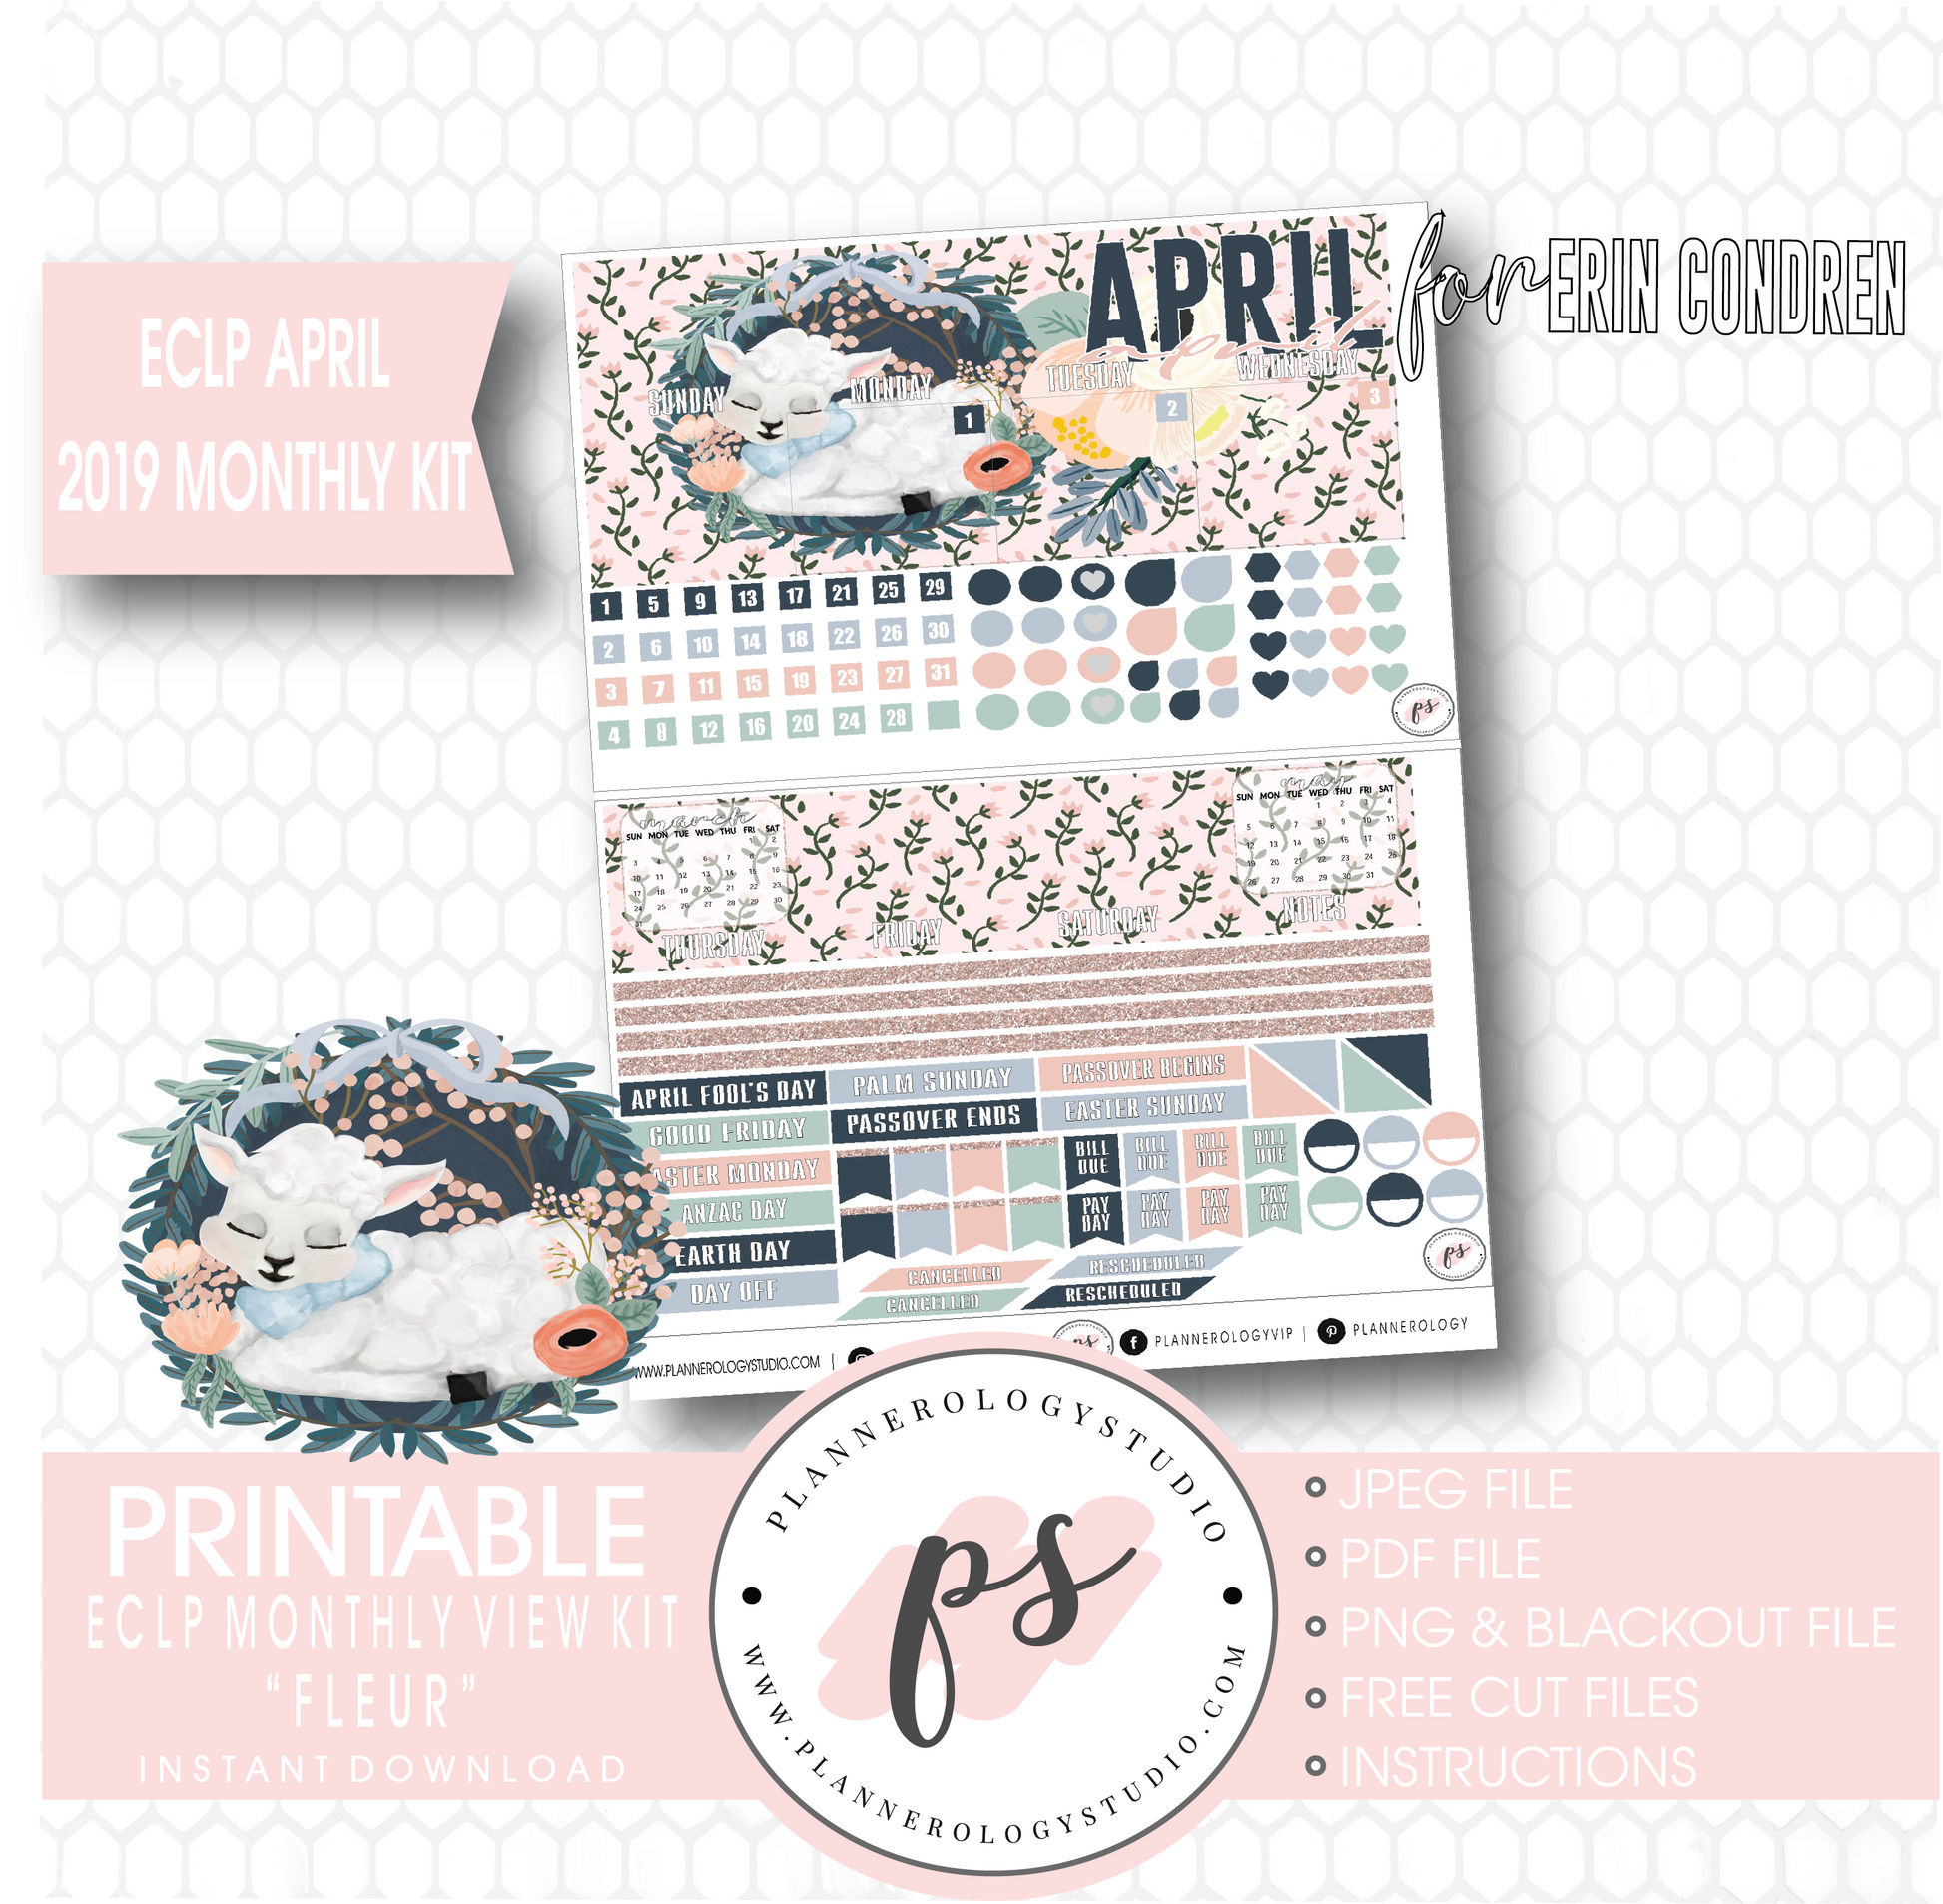 Fleur Easter April 2019 Monthly View Kit Digital Printable Planner Stickers (for use with Erin Condren) - Plannerologystudio